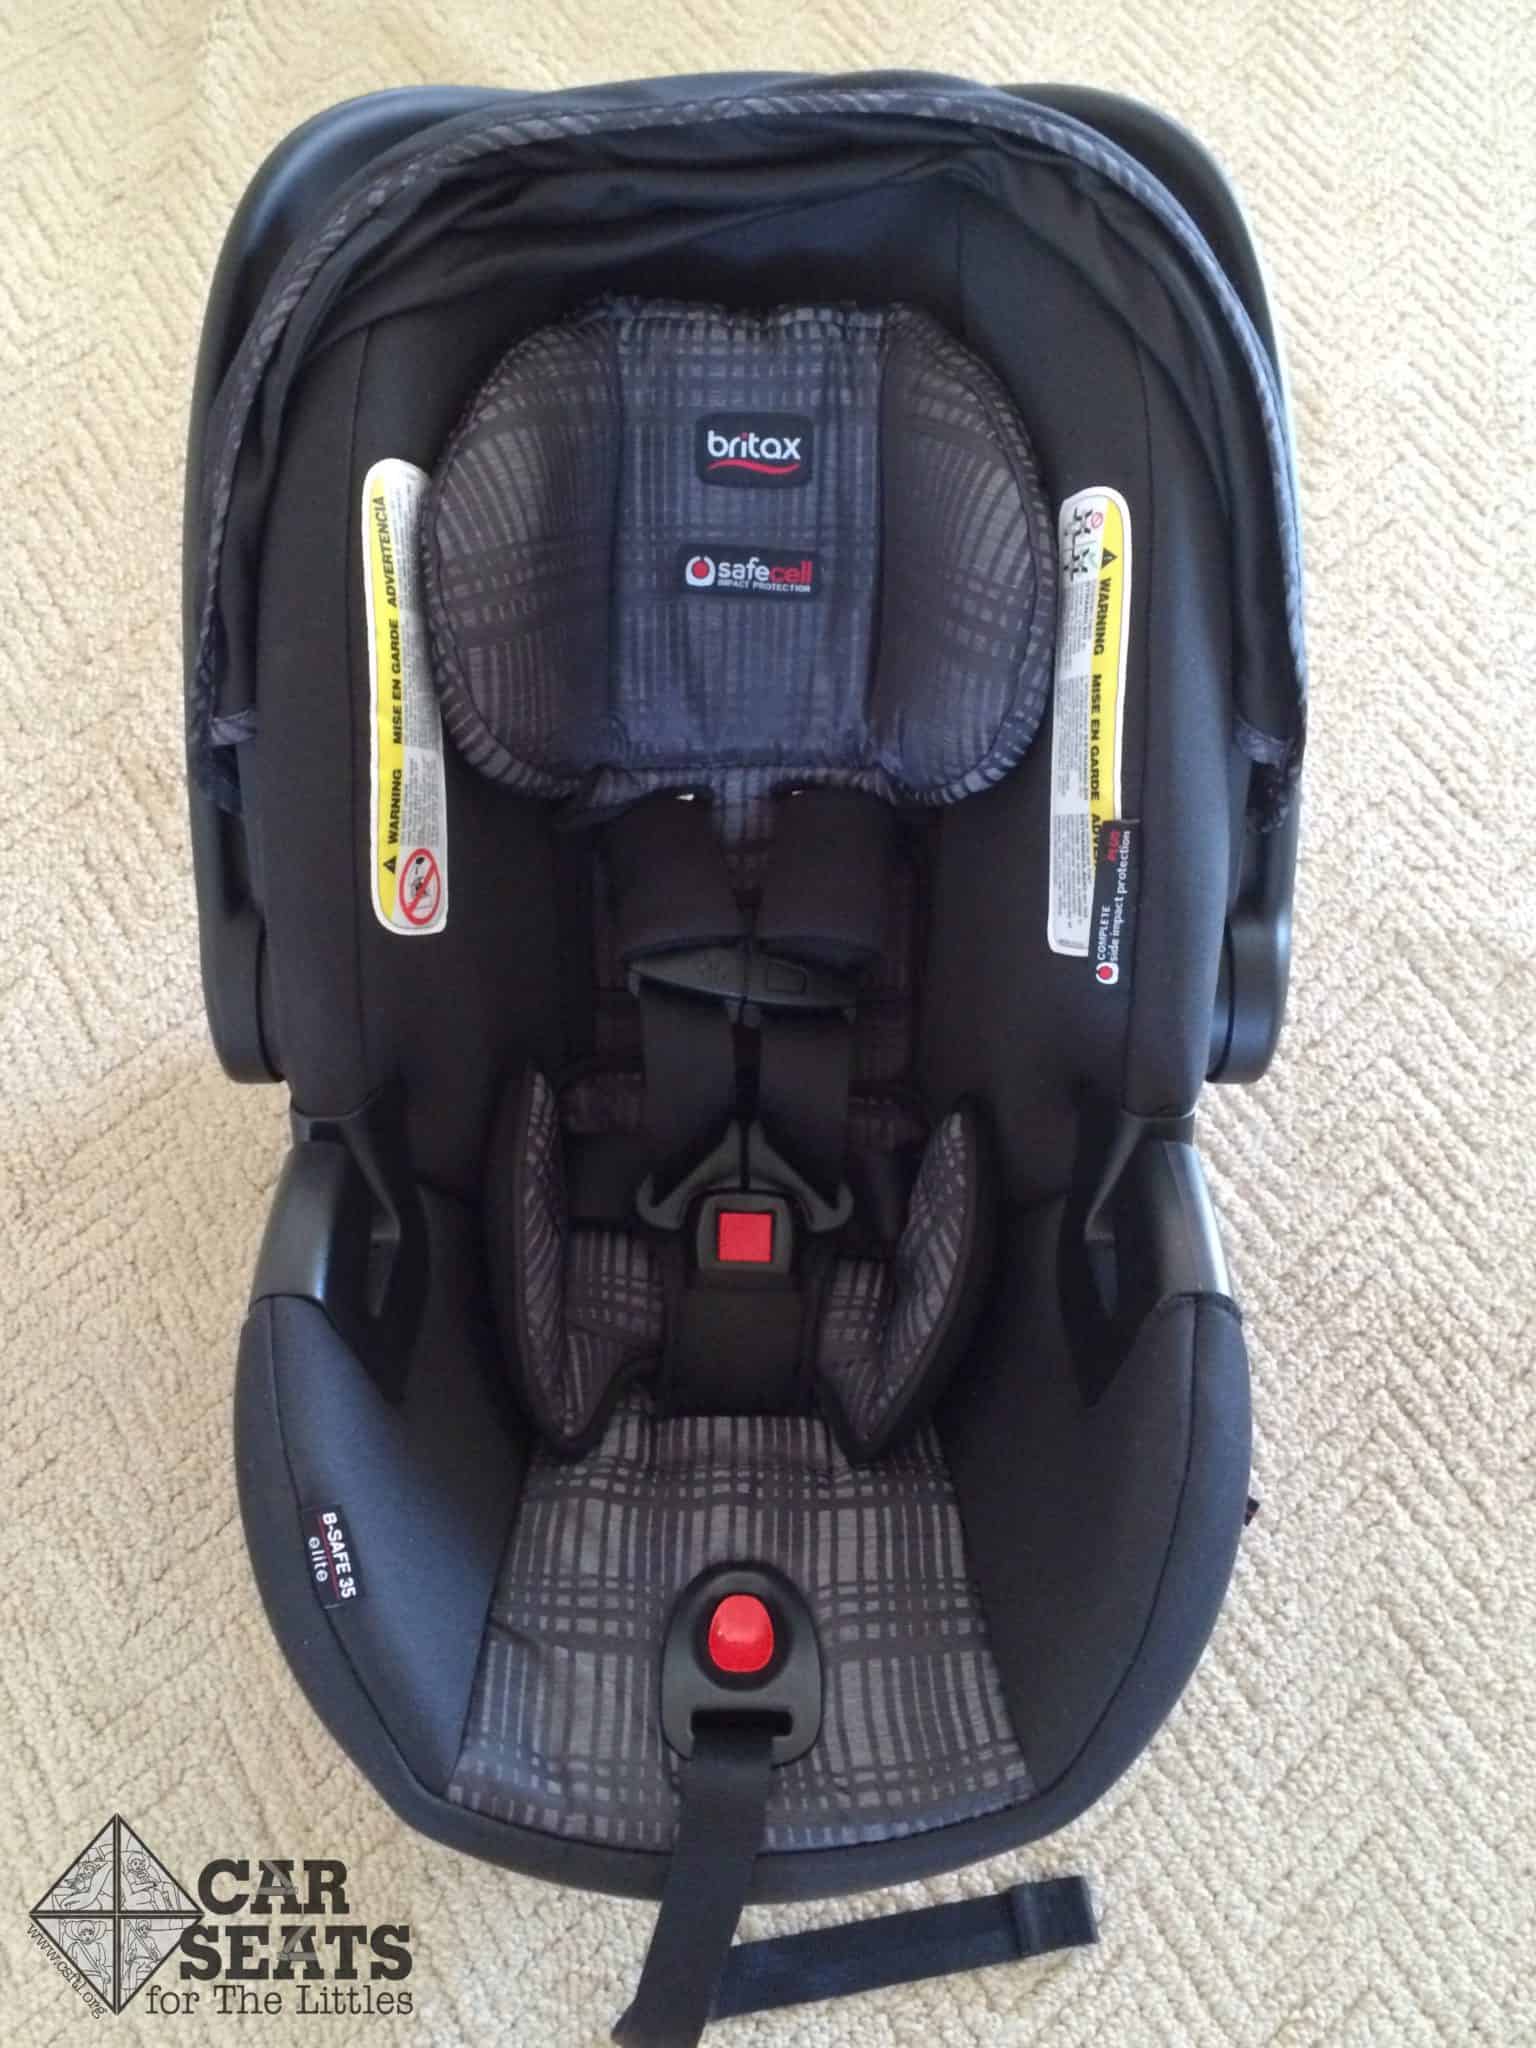 Britax B Safe 35 Elite Review Car Seats For The Littles - How Long To Use Infant Insert In Britax Car Seat